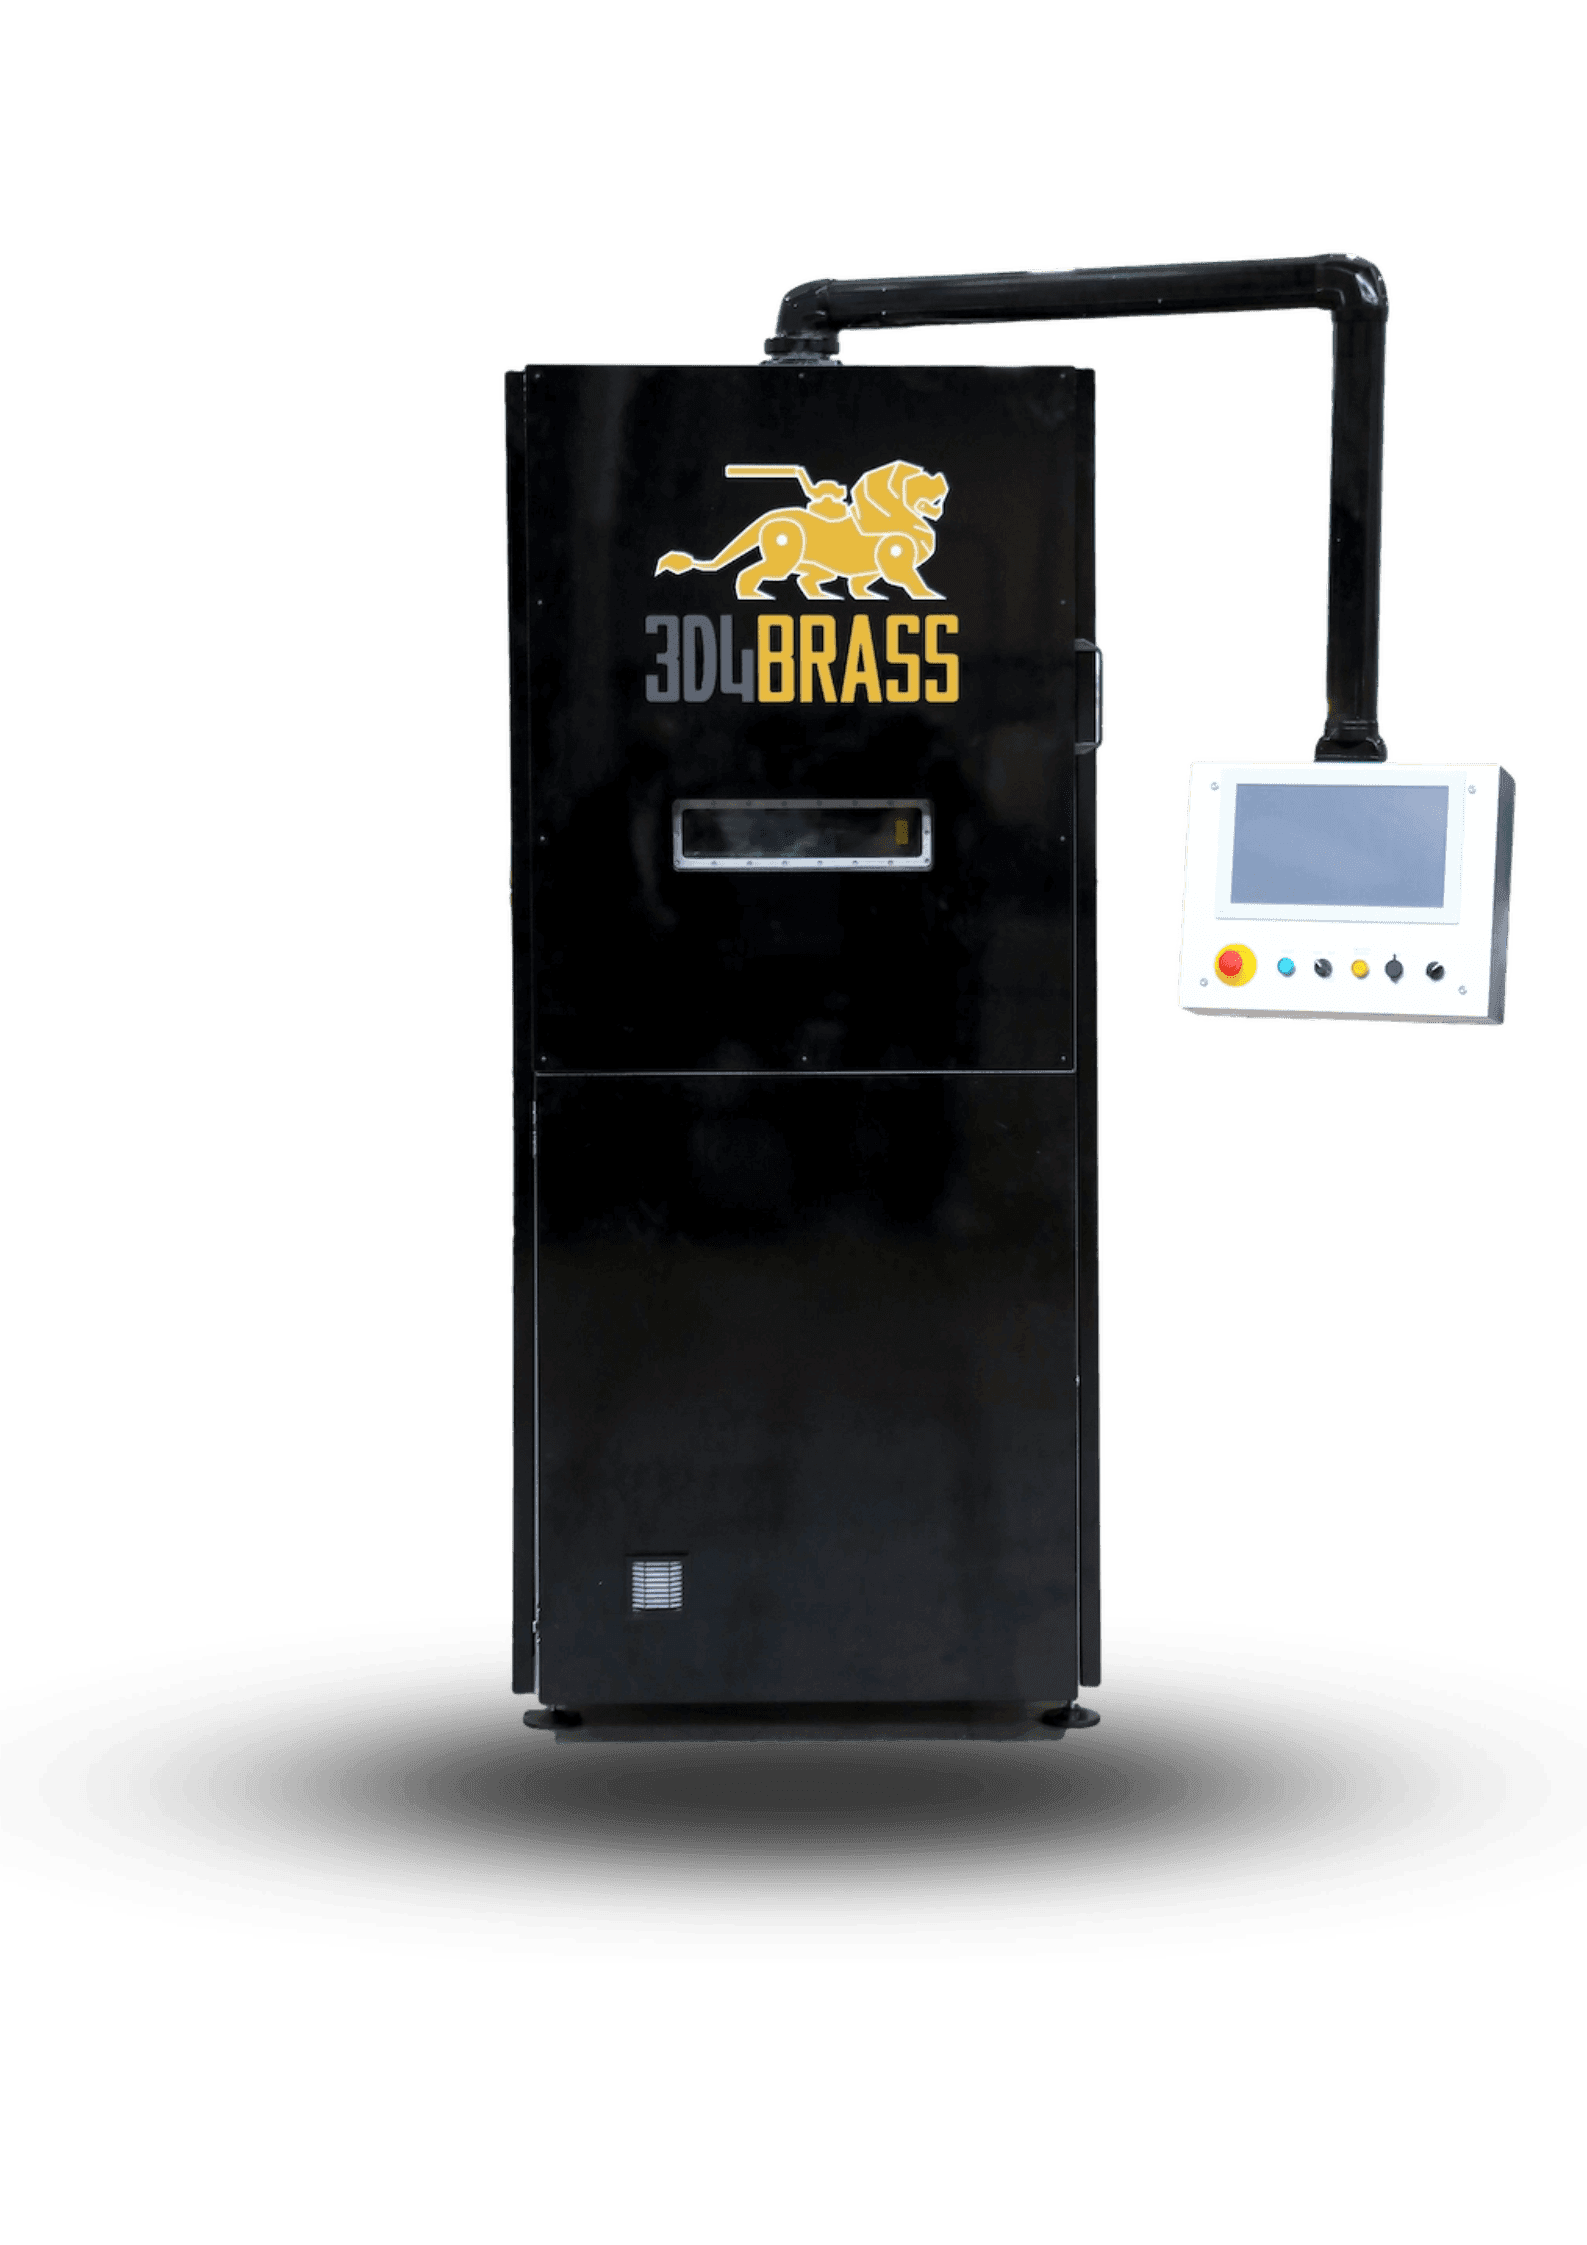 Product Features of 3D4BRASS - the first 3D printer for brass image